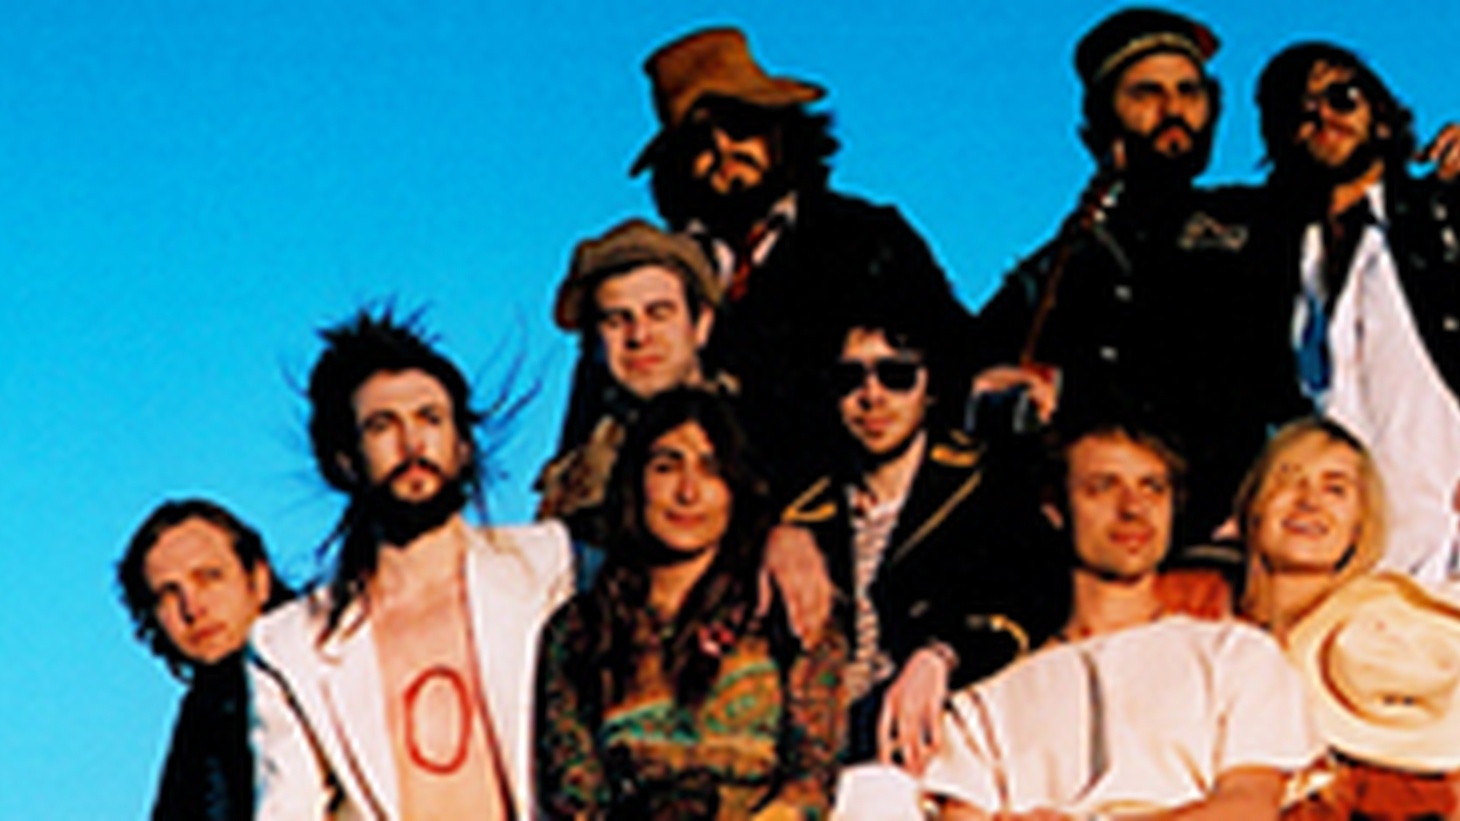 Edward Sharpe And The Magnetic Zeros Wallpapers